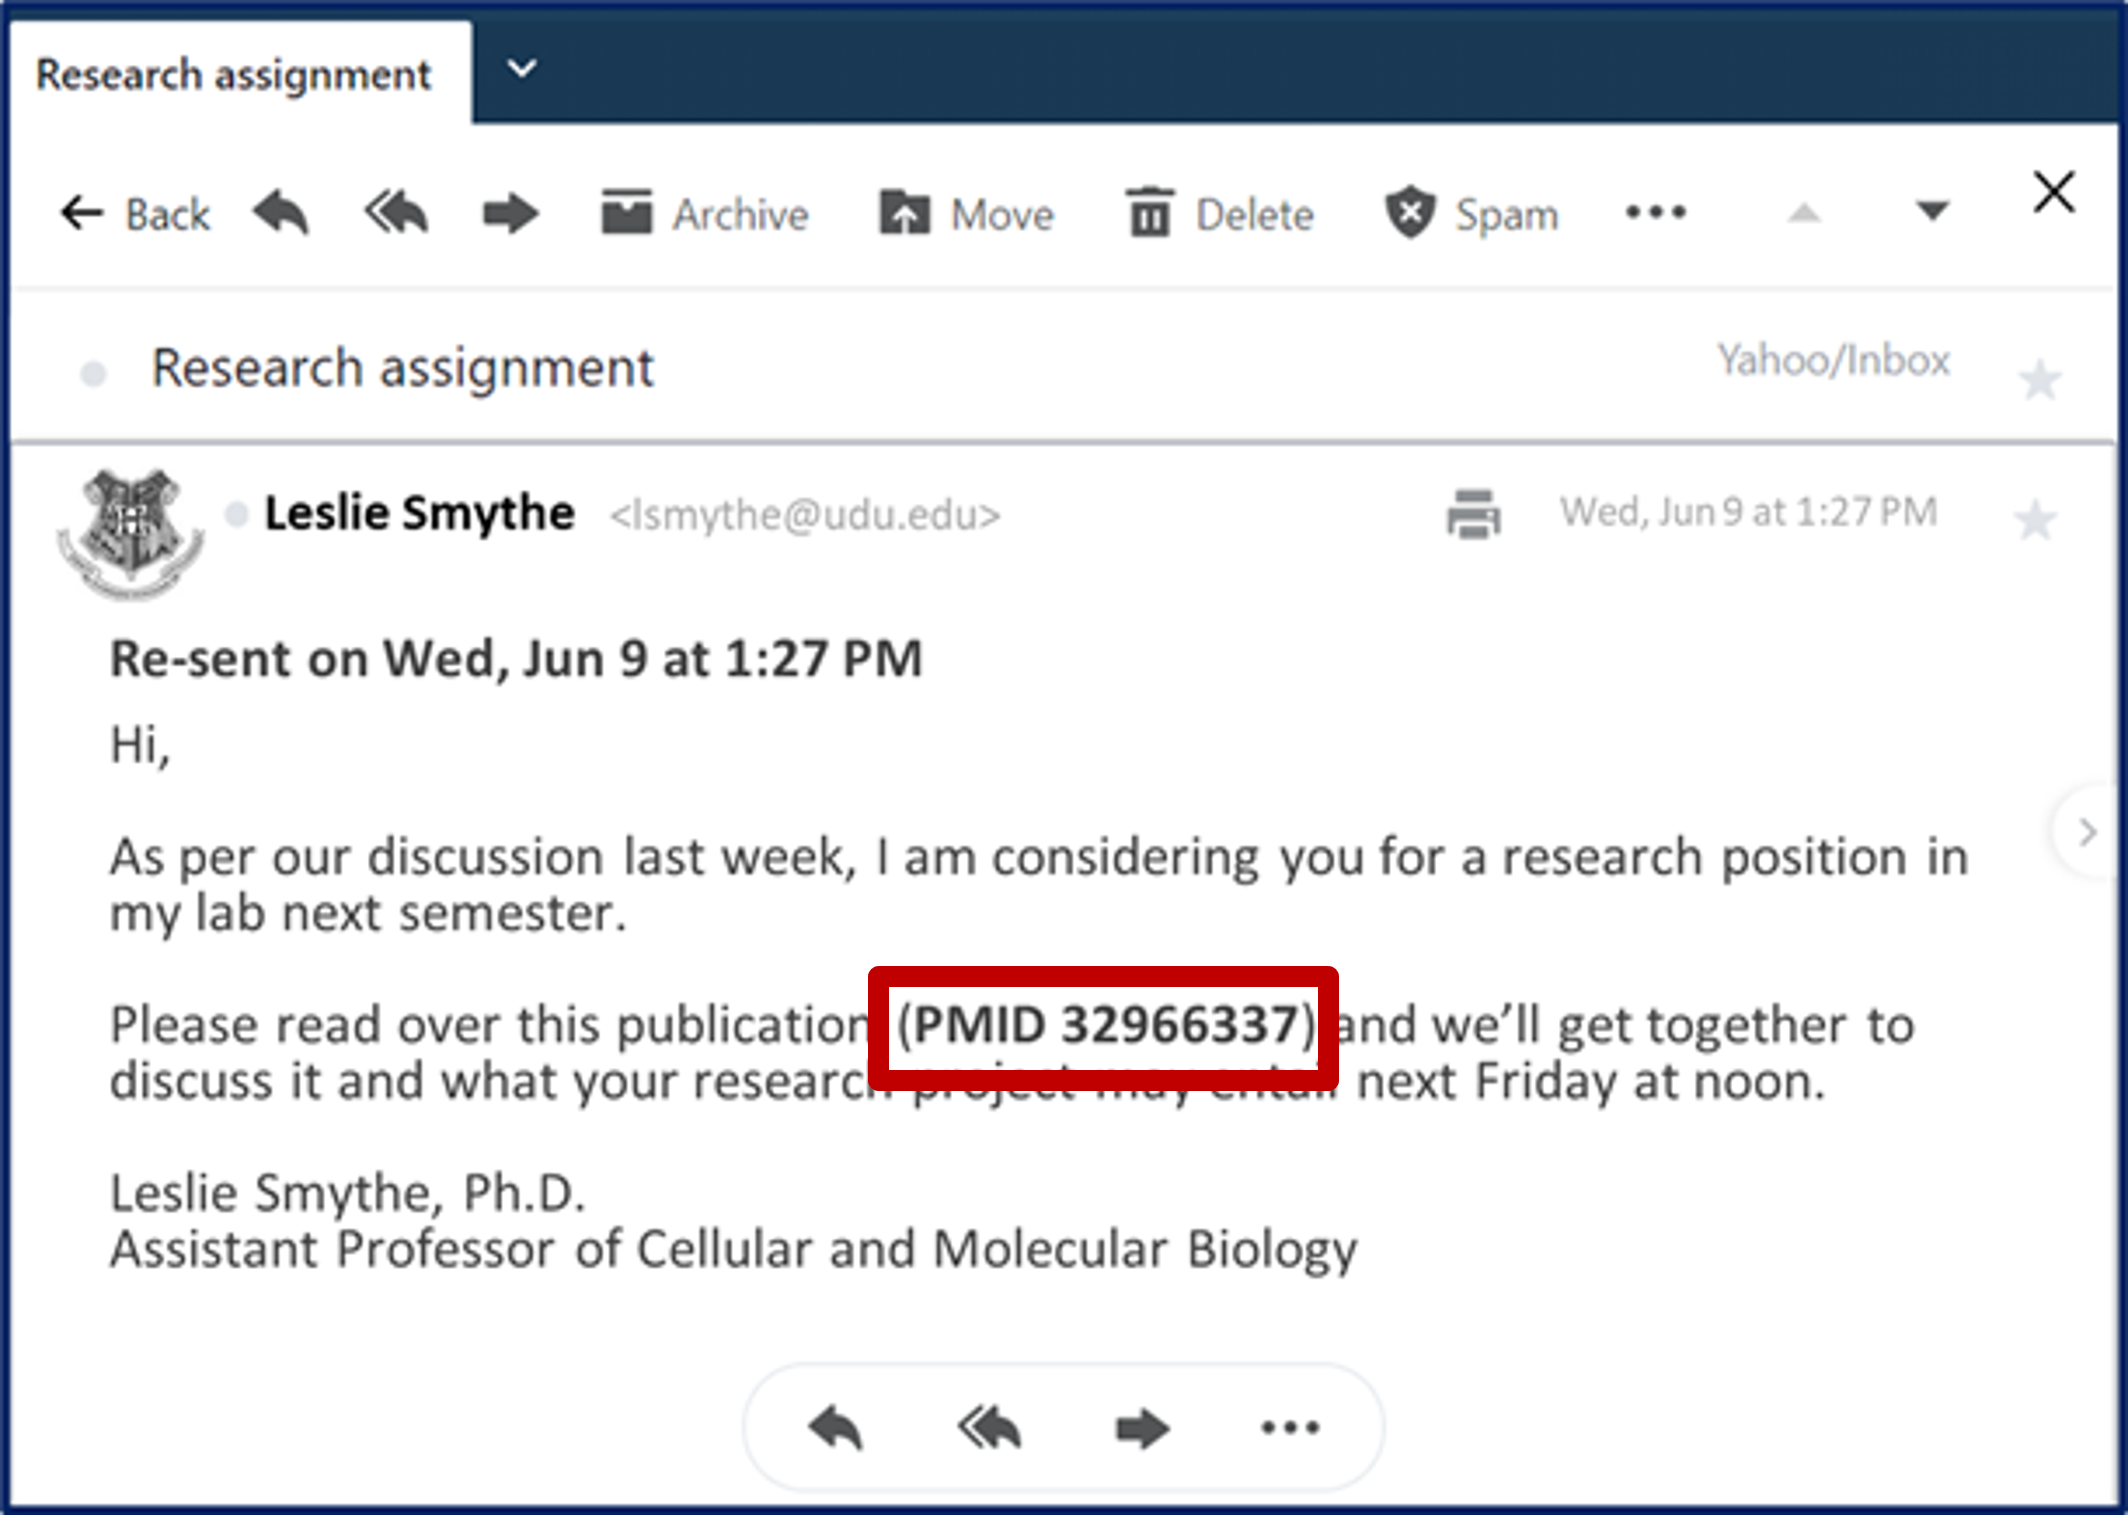 Professor Leslie Smythe's Email asking you to read PMID 32966337 for your next meeting